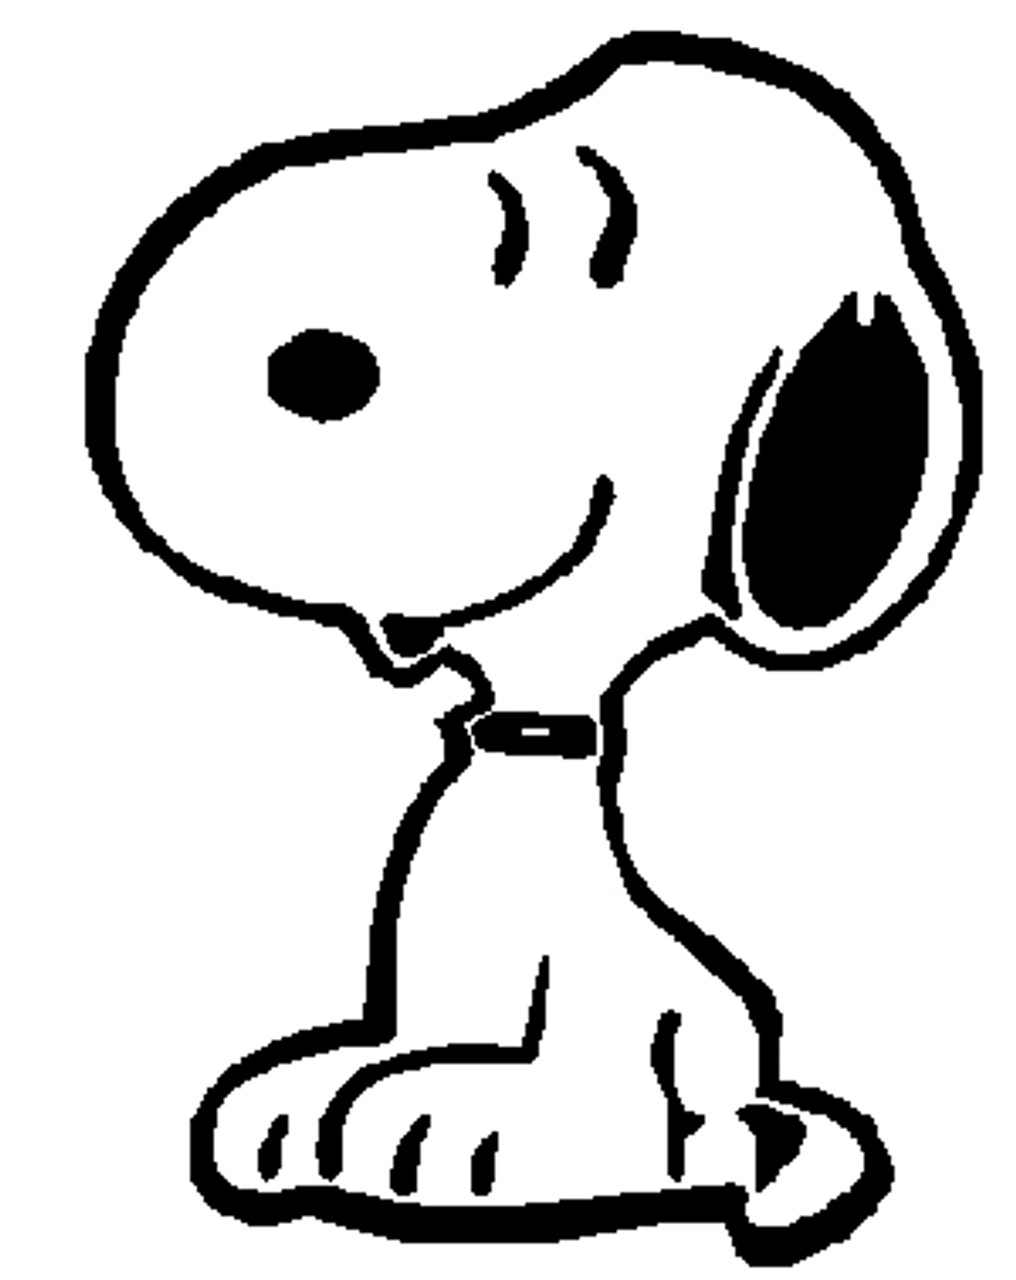 Snoopy Dancing – Cartoon Stickers And Decals For Your Car And Truck, Custom Made In the USA